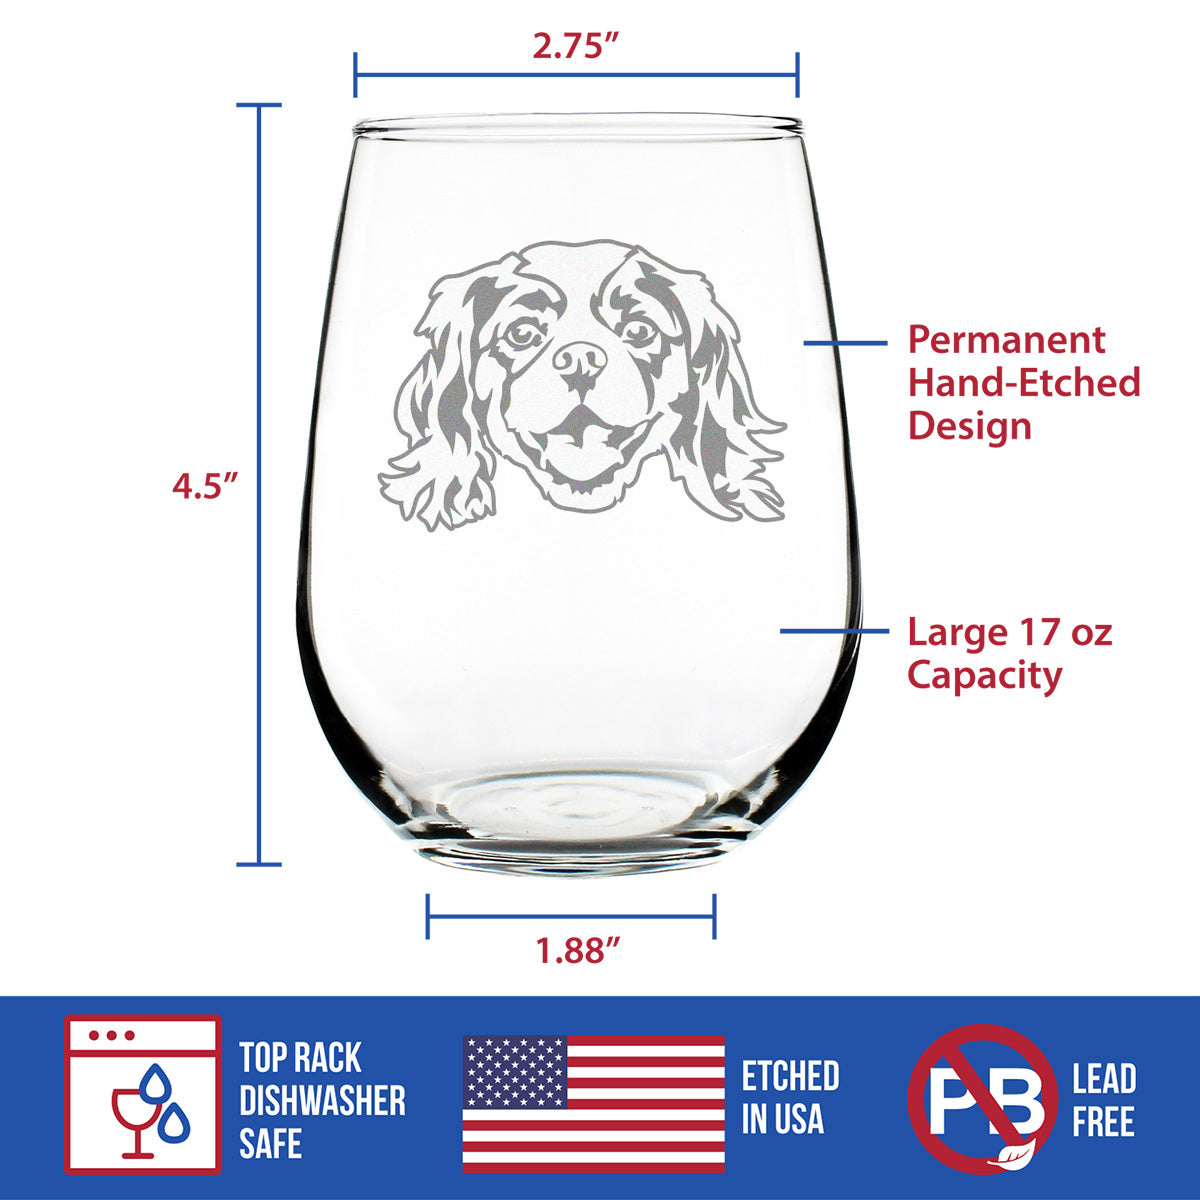 Cavalier King Charles Spaniel Stemless Wine Glass - Cute Dog Themed Decor and Gifts for Moms &amp; Dads of Cavaliers - Large 17 Oz